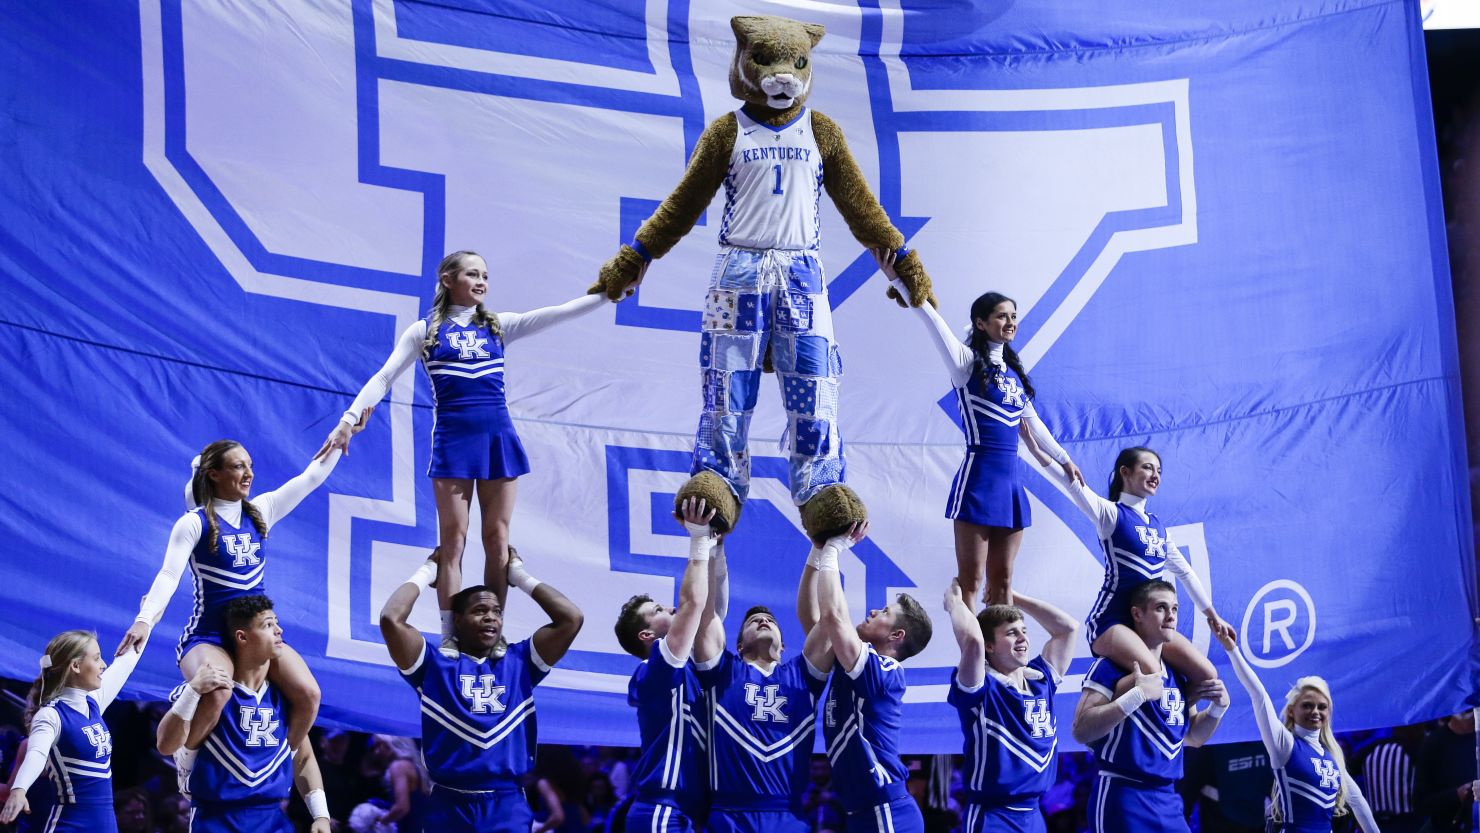 The Kentucky Wildcats mascot preforms with the cheerleading team during a February 2020 game.